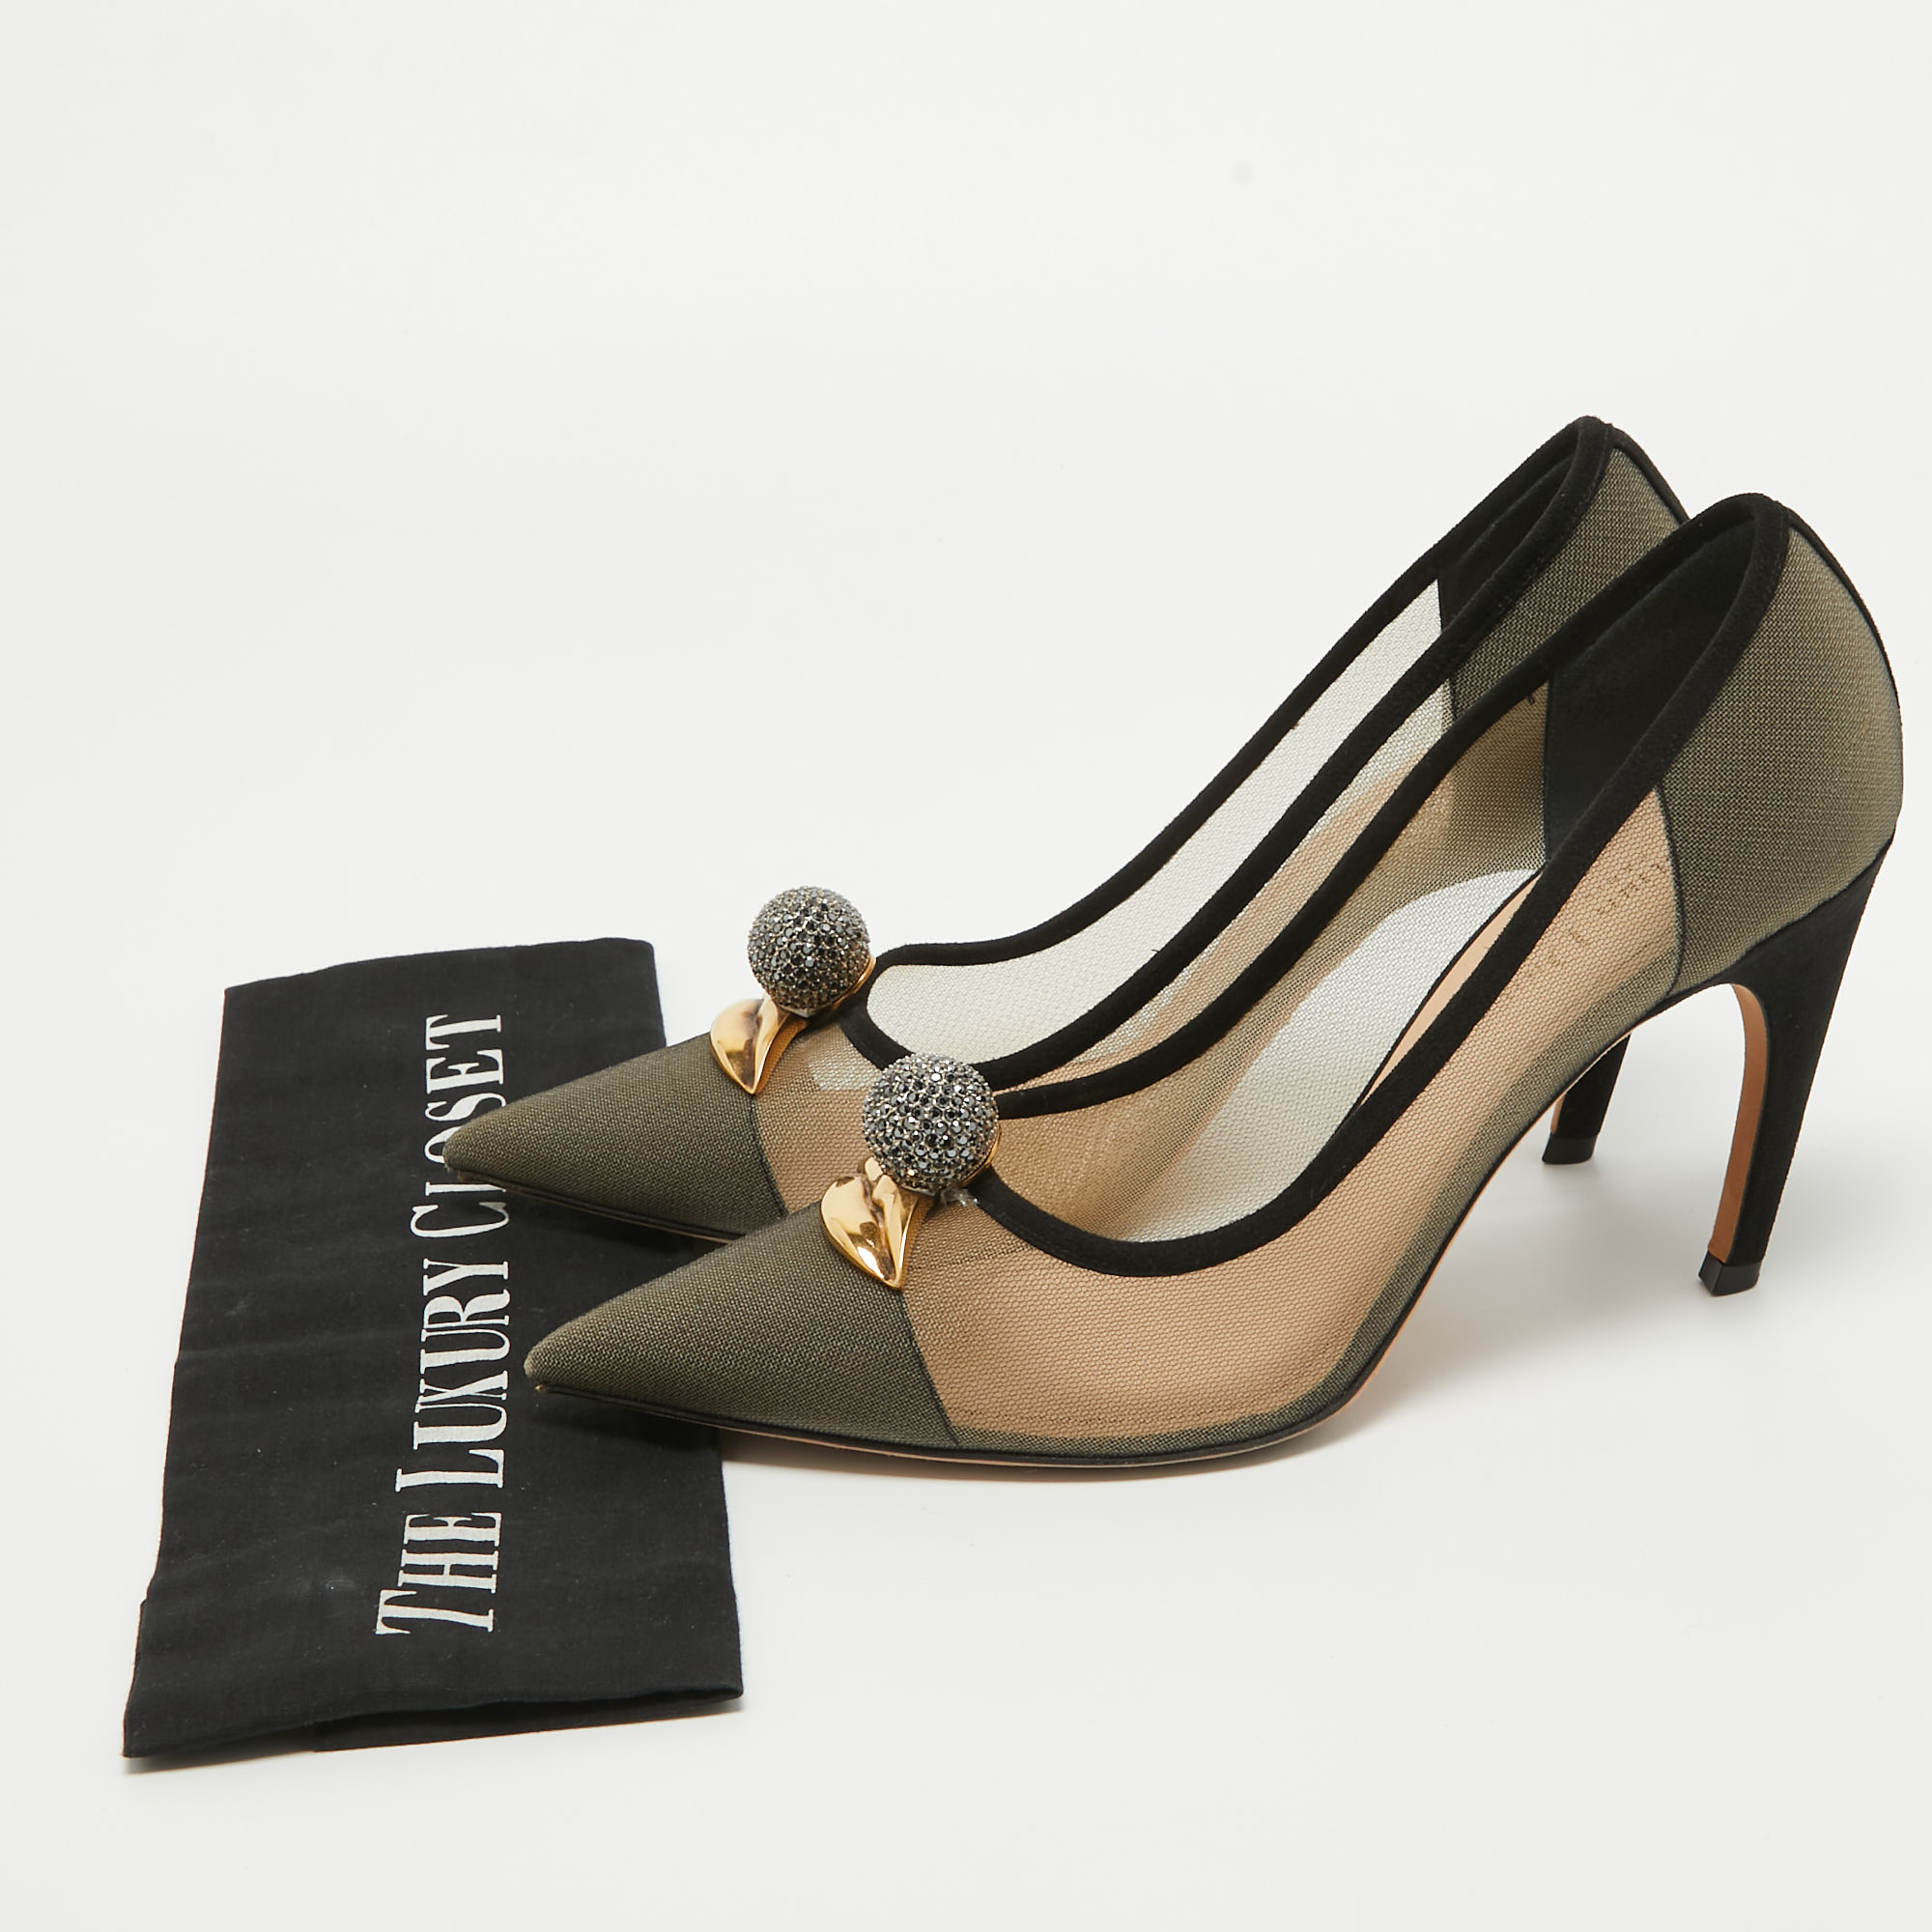 Dior Beige/Black Suede And Mesh Lips Pumps Size 40